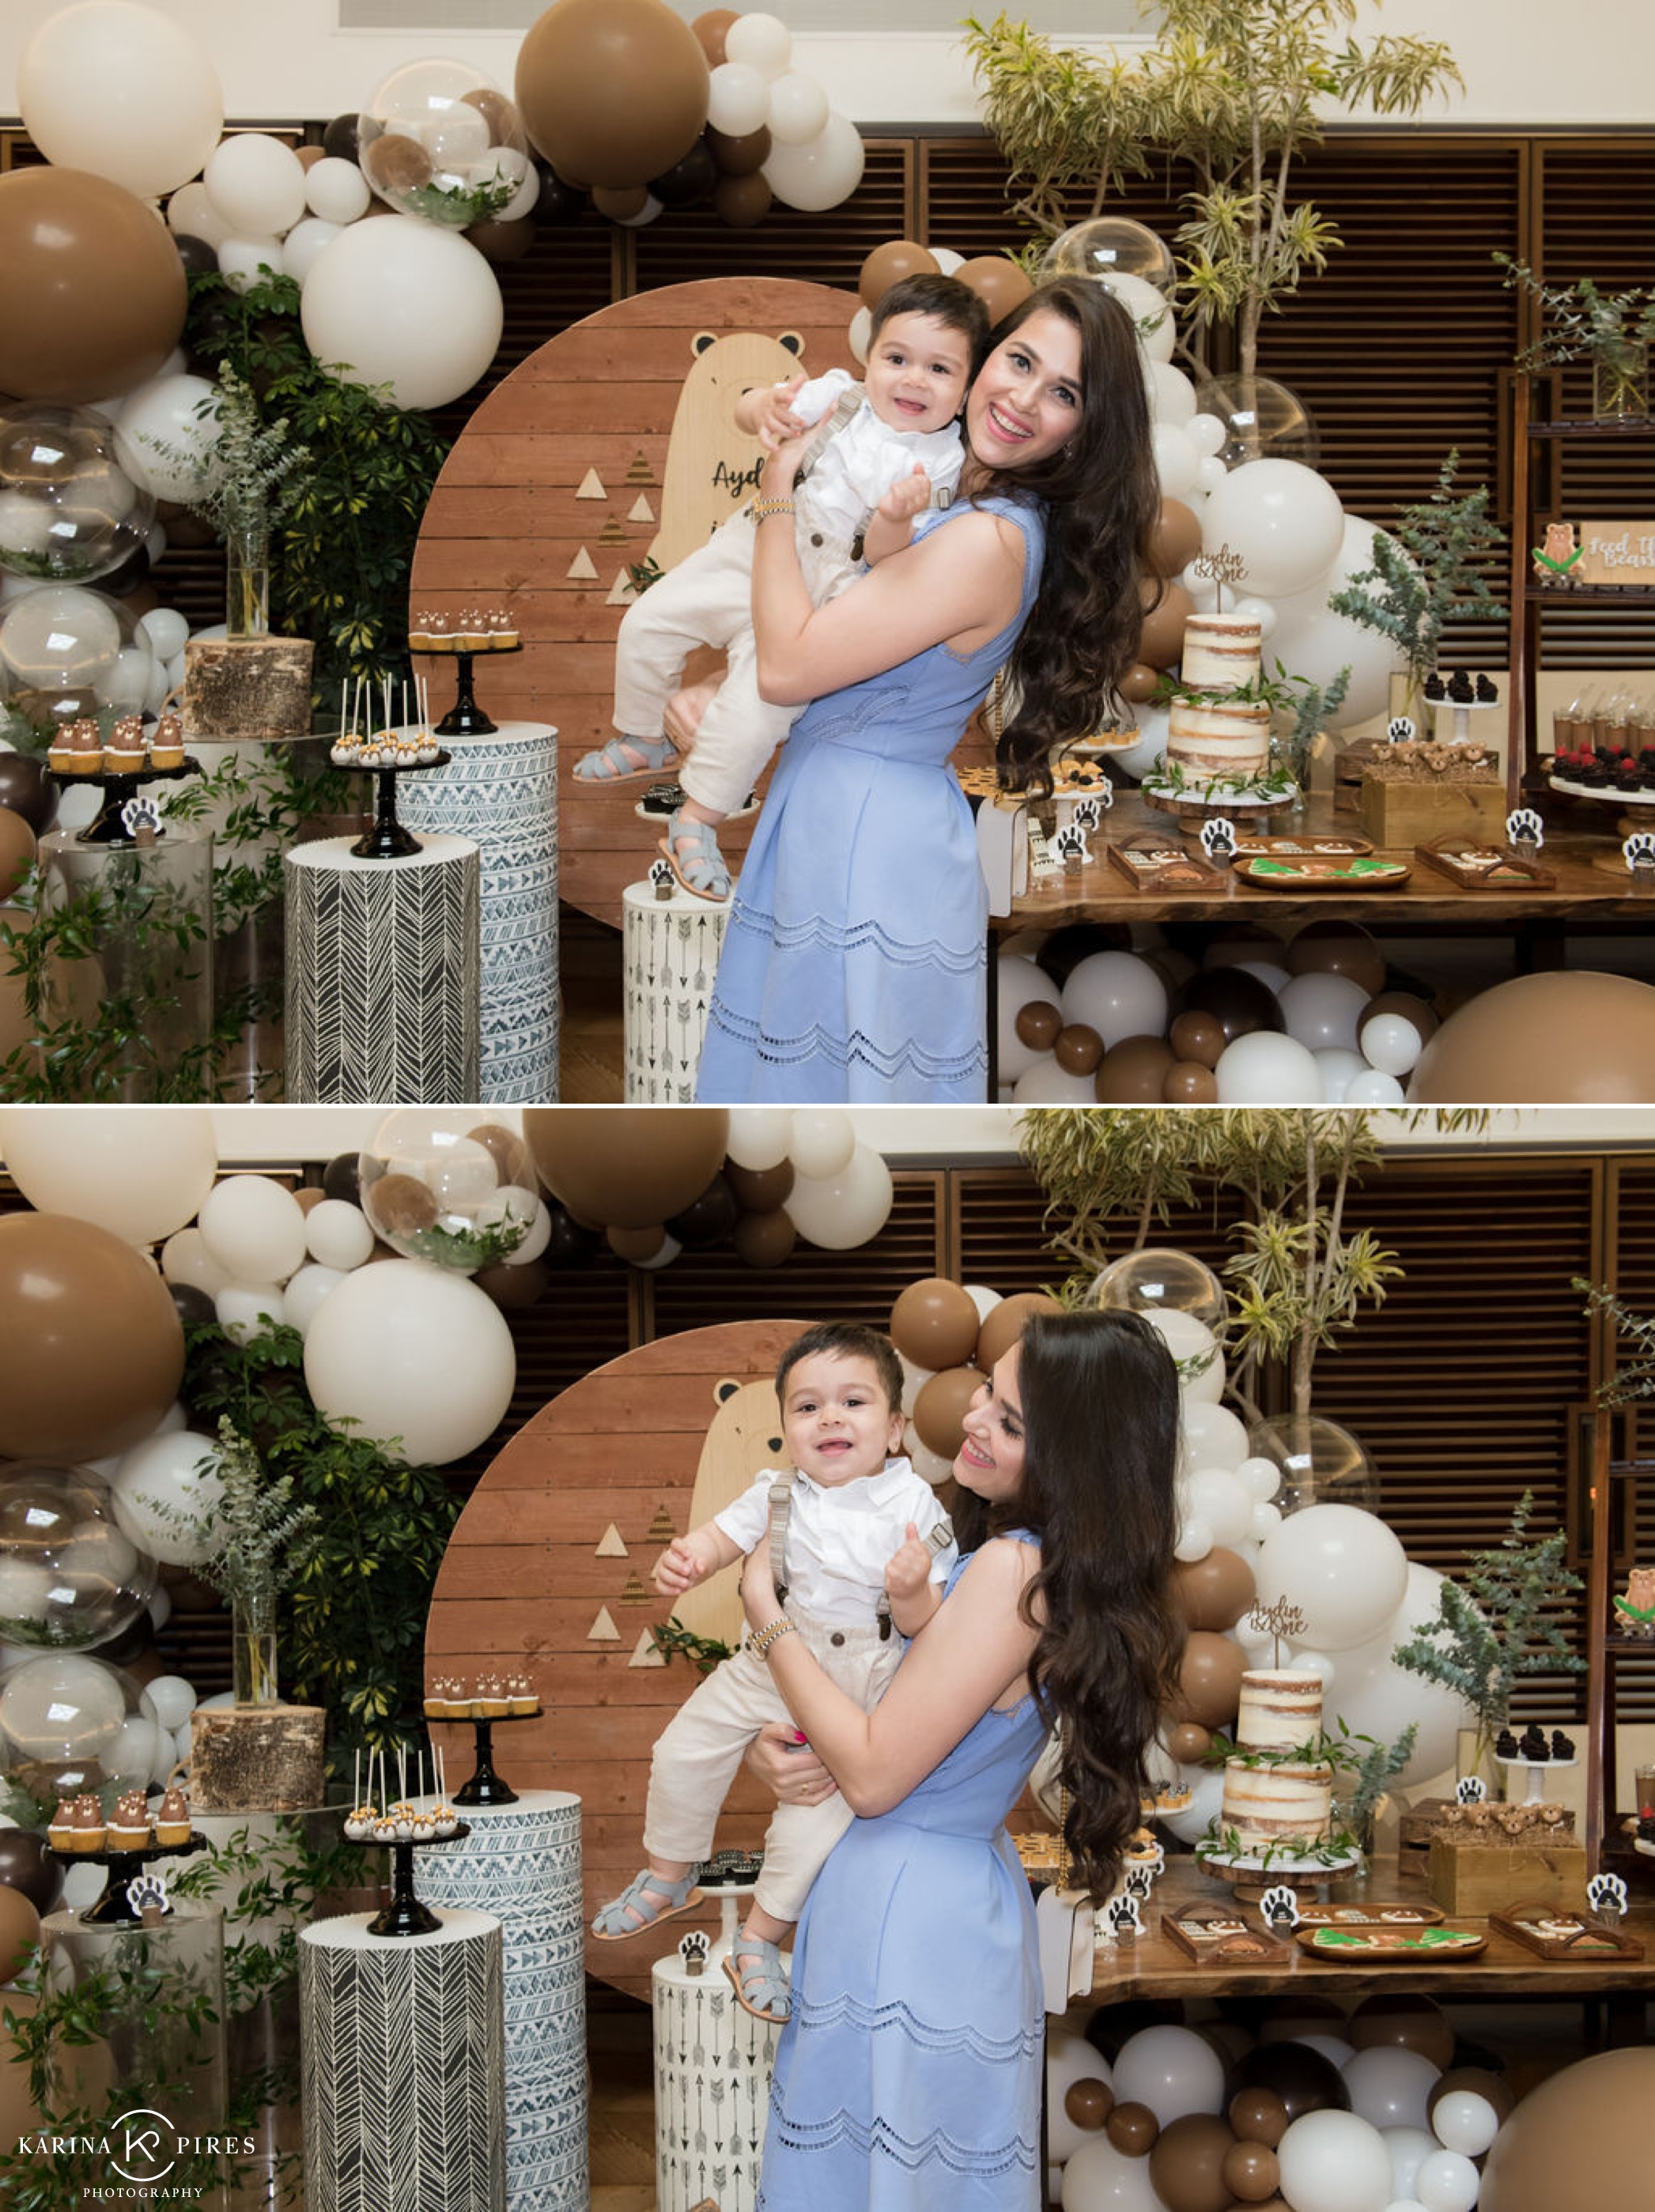 Aydin's First Birthday Party photographed by Karina Pires Photography